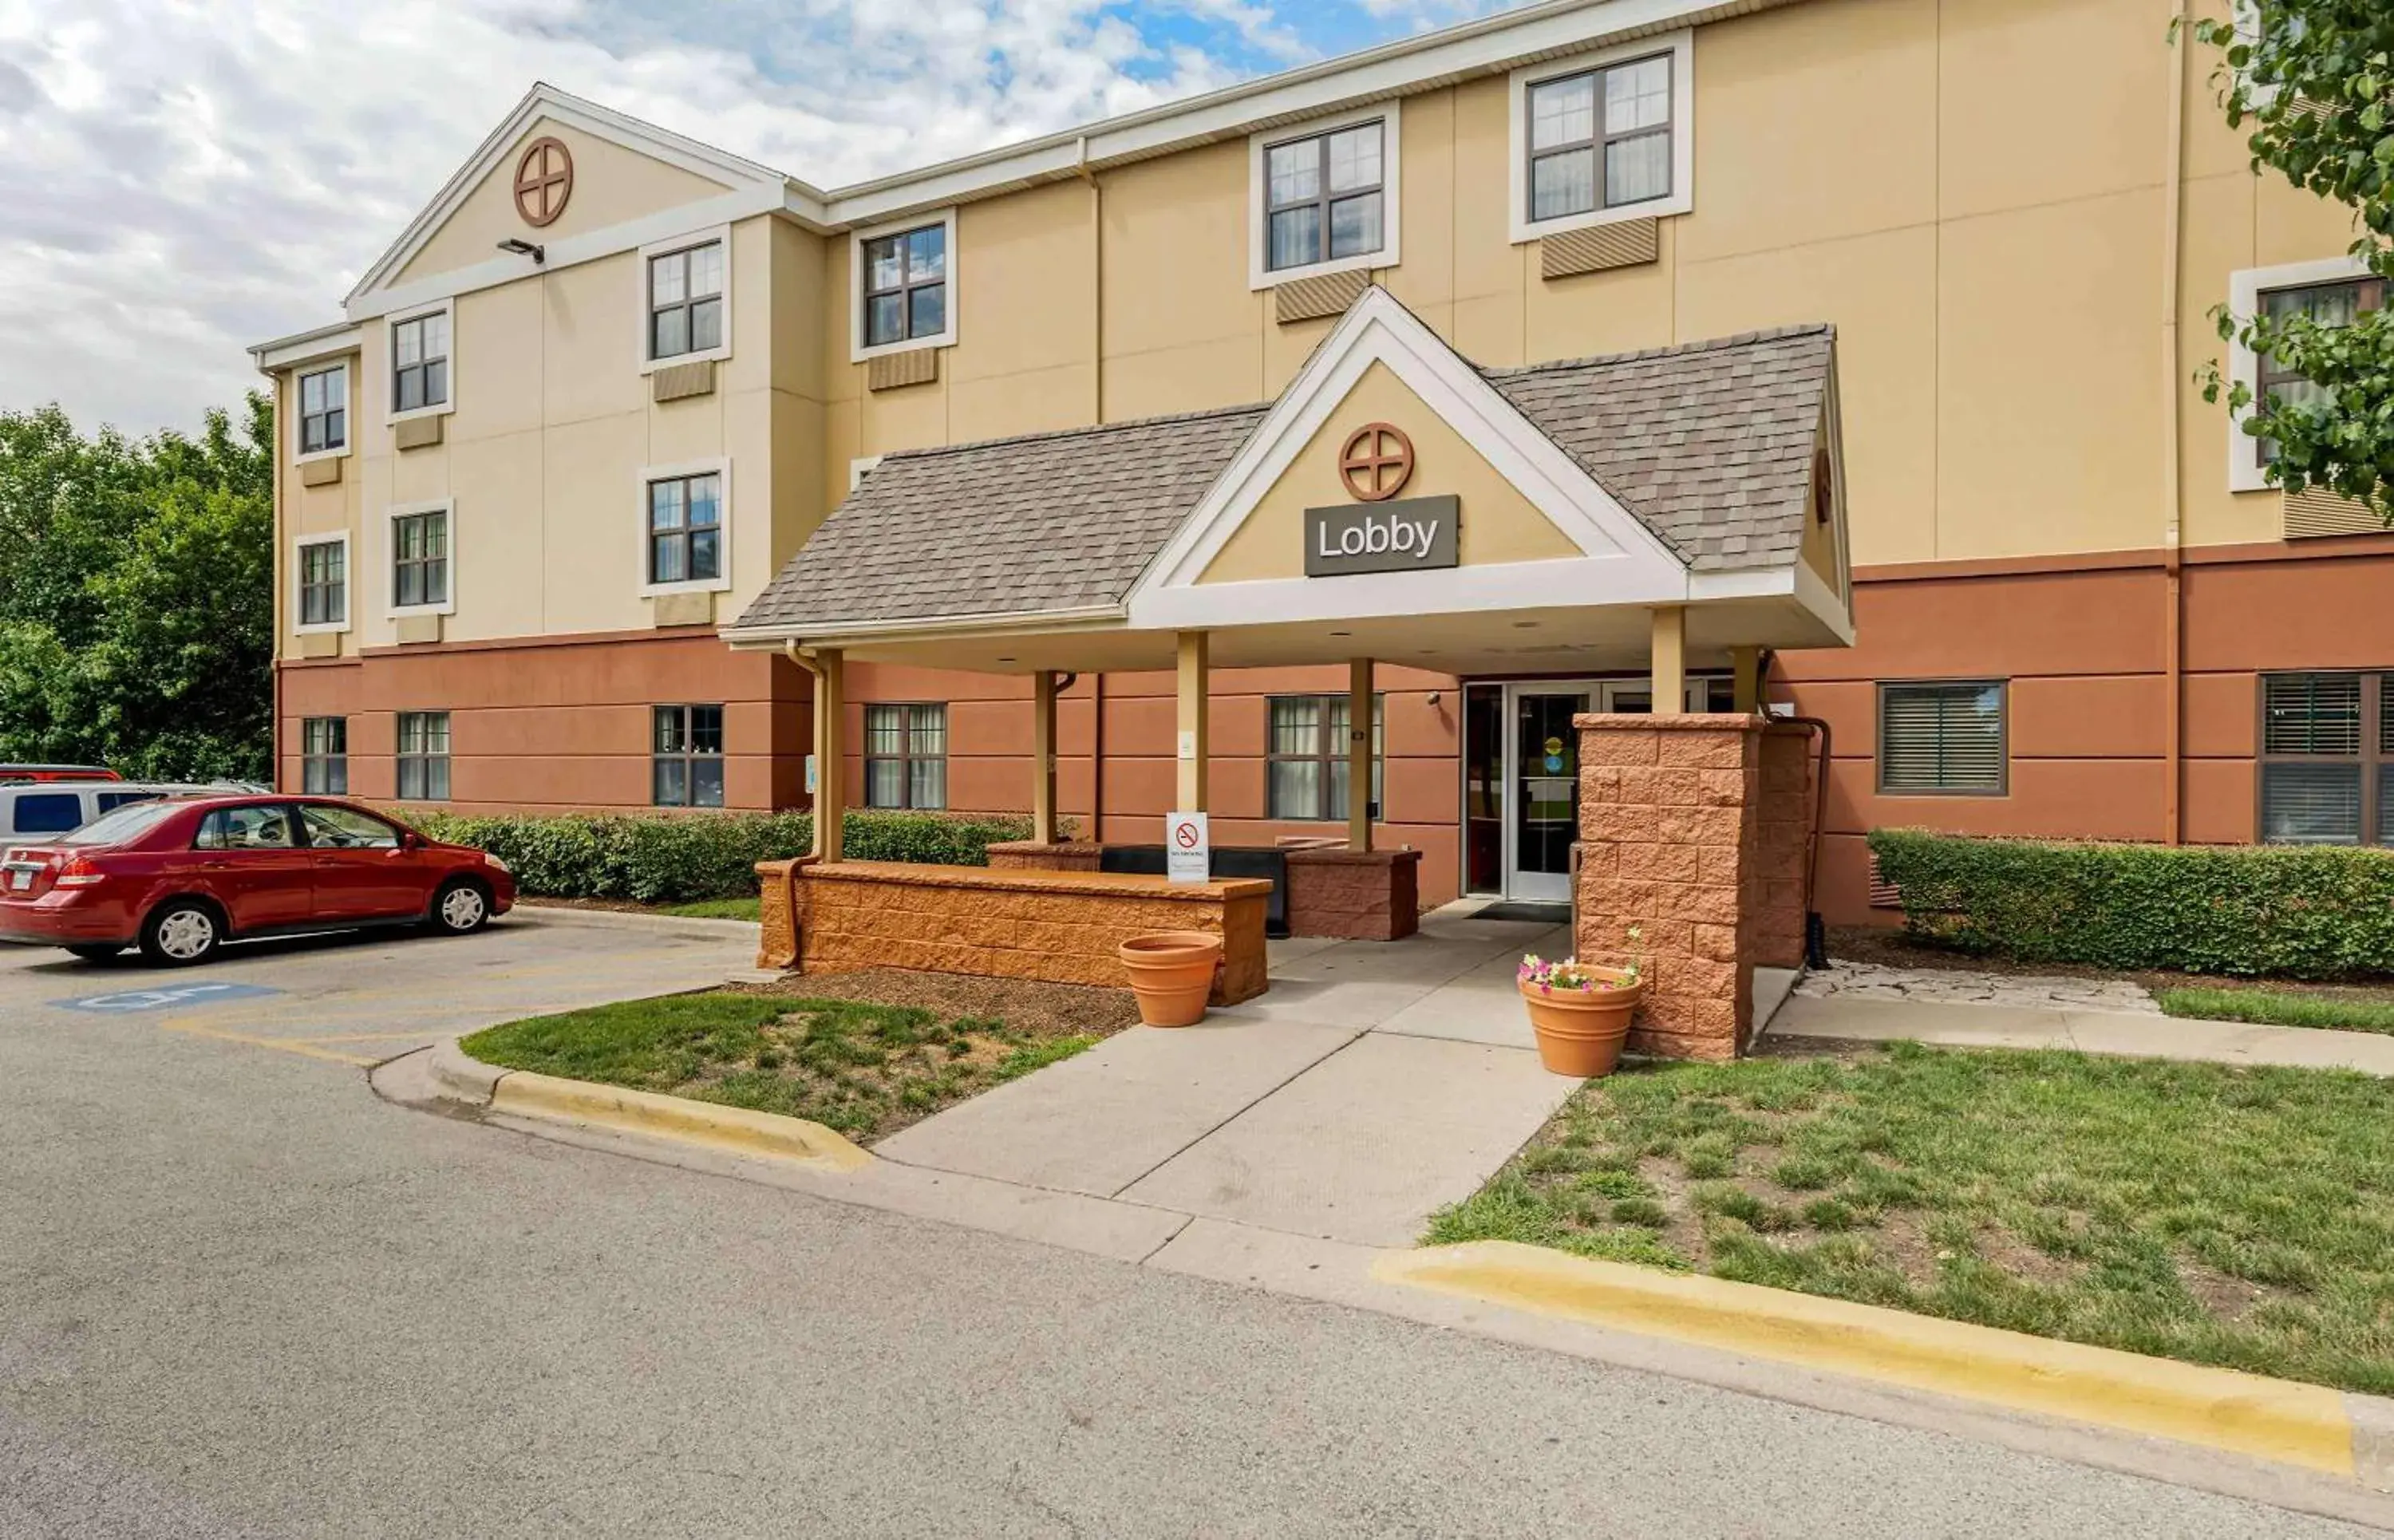 Property Building in Extended Stay America Suites - Chicago - Gurnee